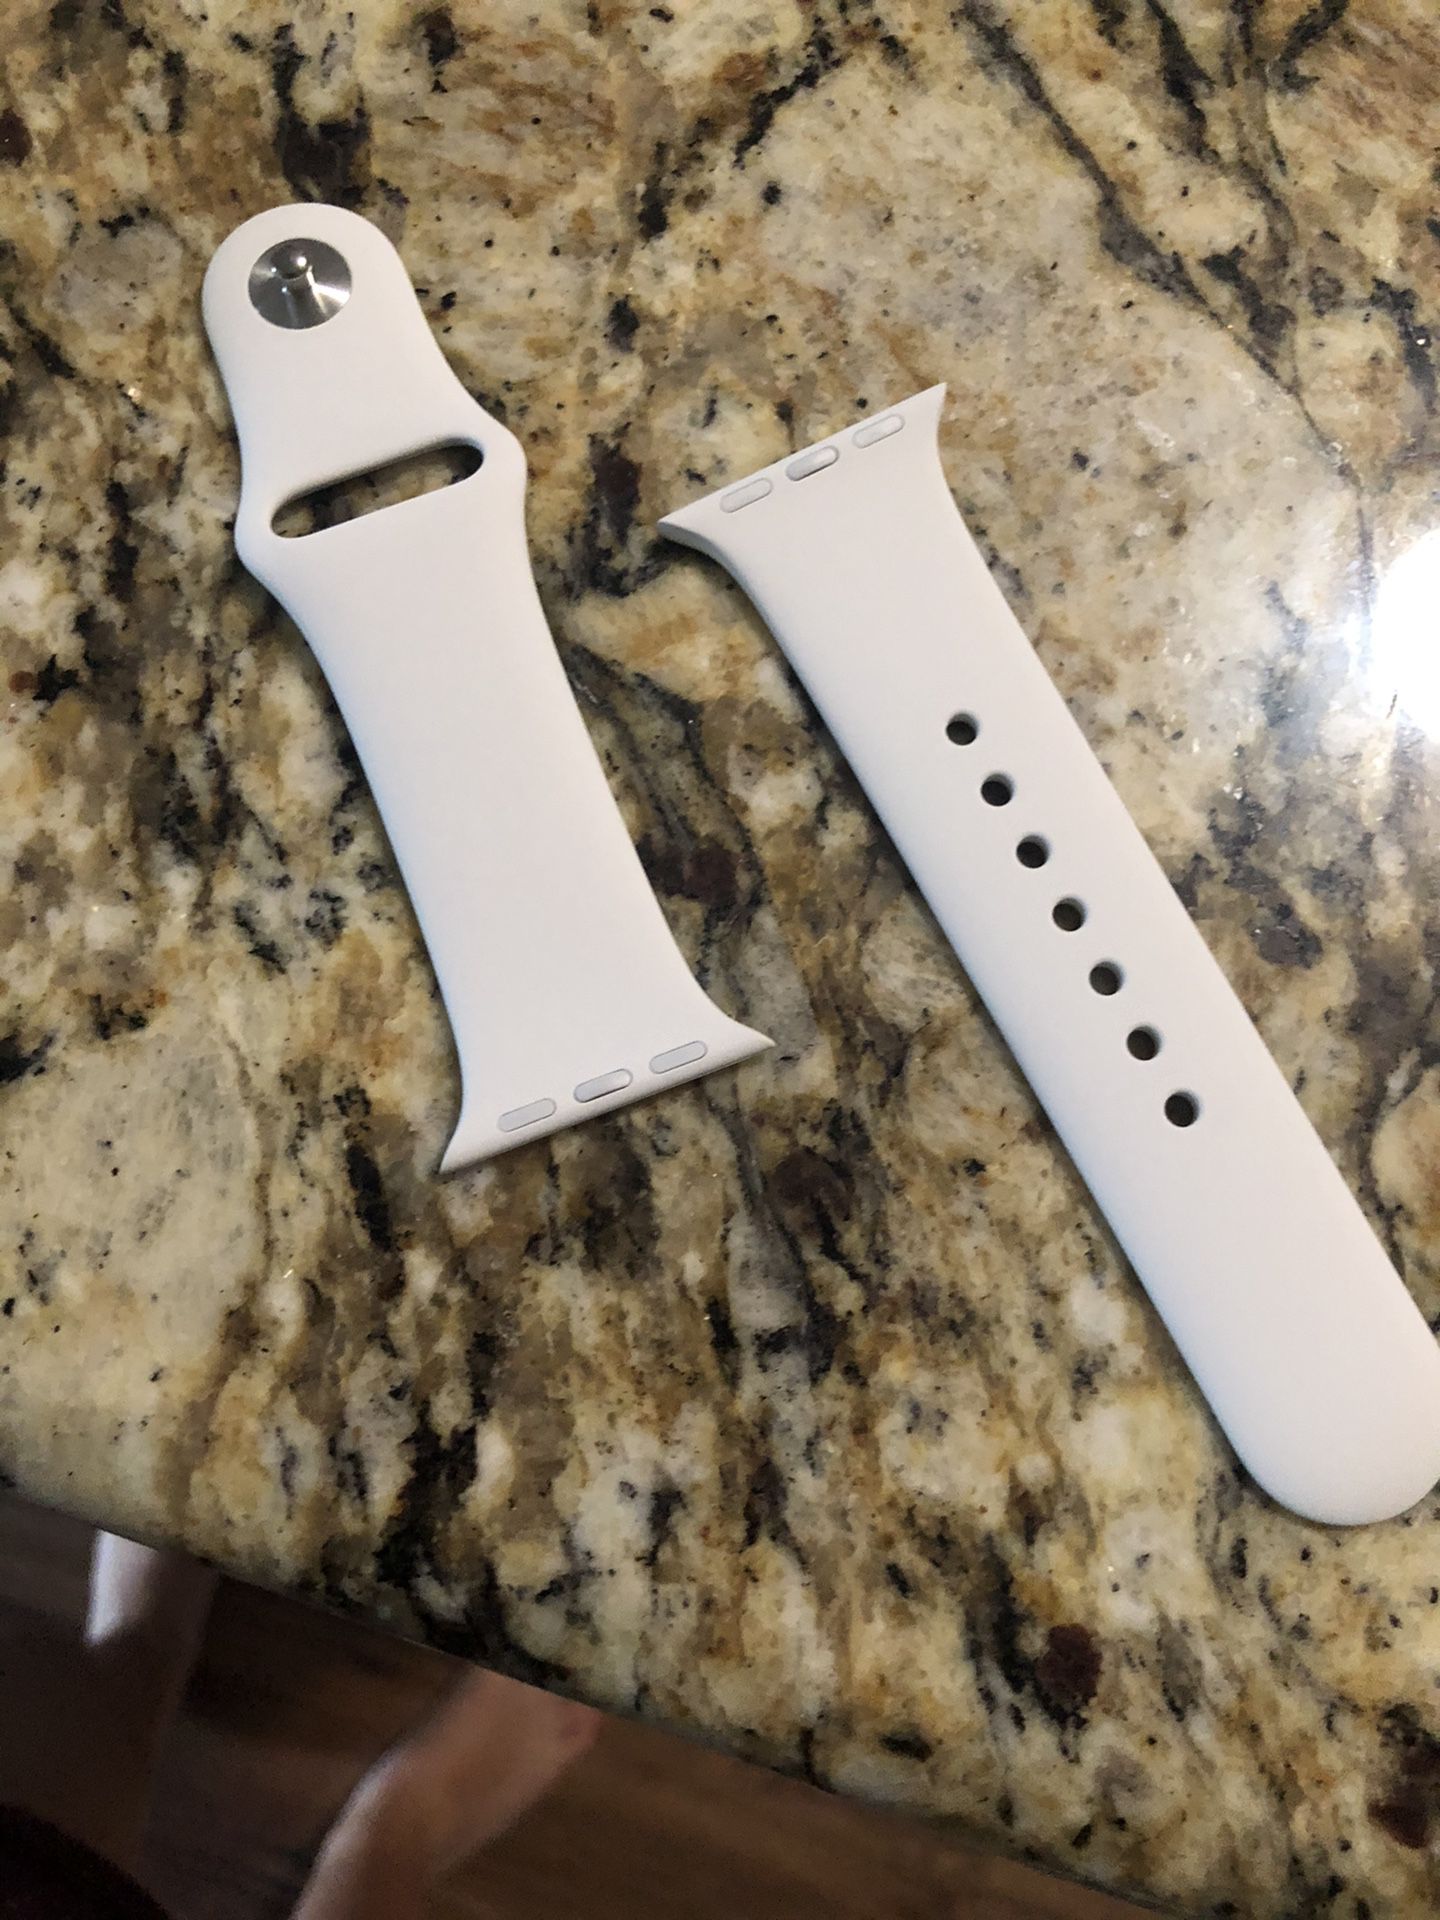 Brand new white apple watch band $5 38mm